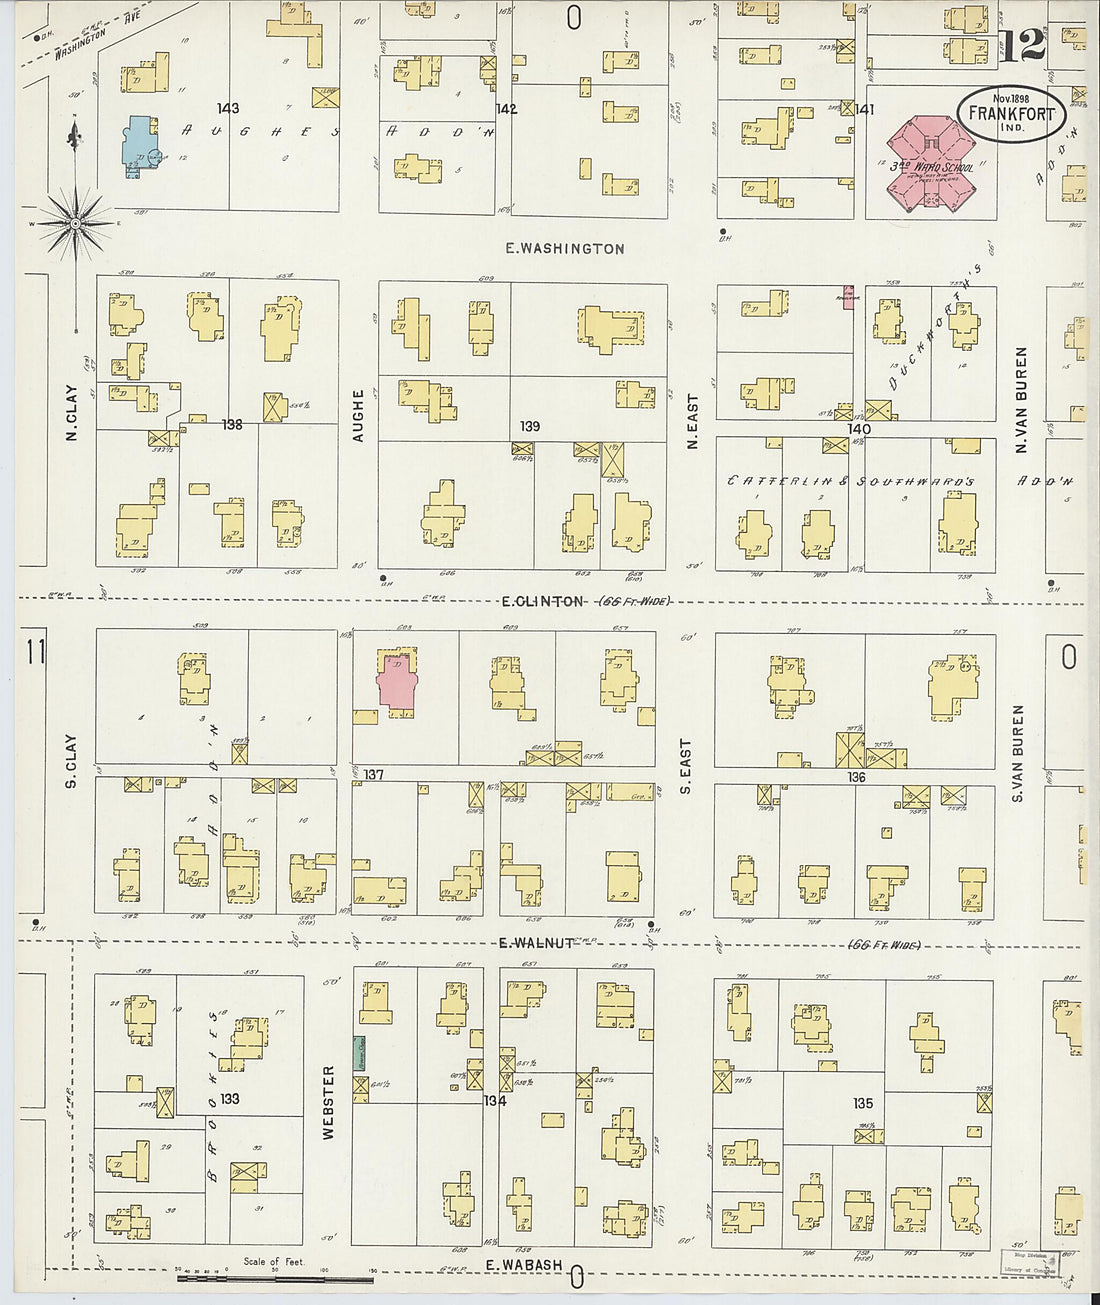 This old map of Frankfort, Clinton County, Indiana was created by Sanborn Map Company in 1898